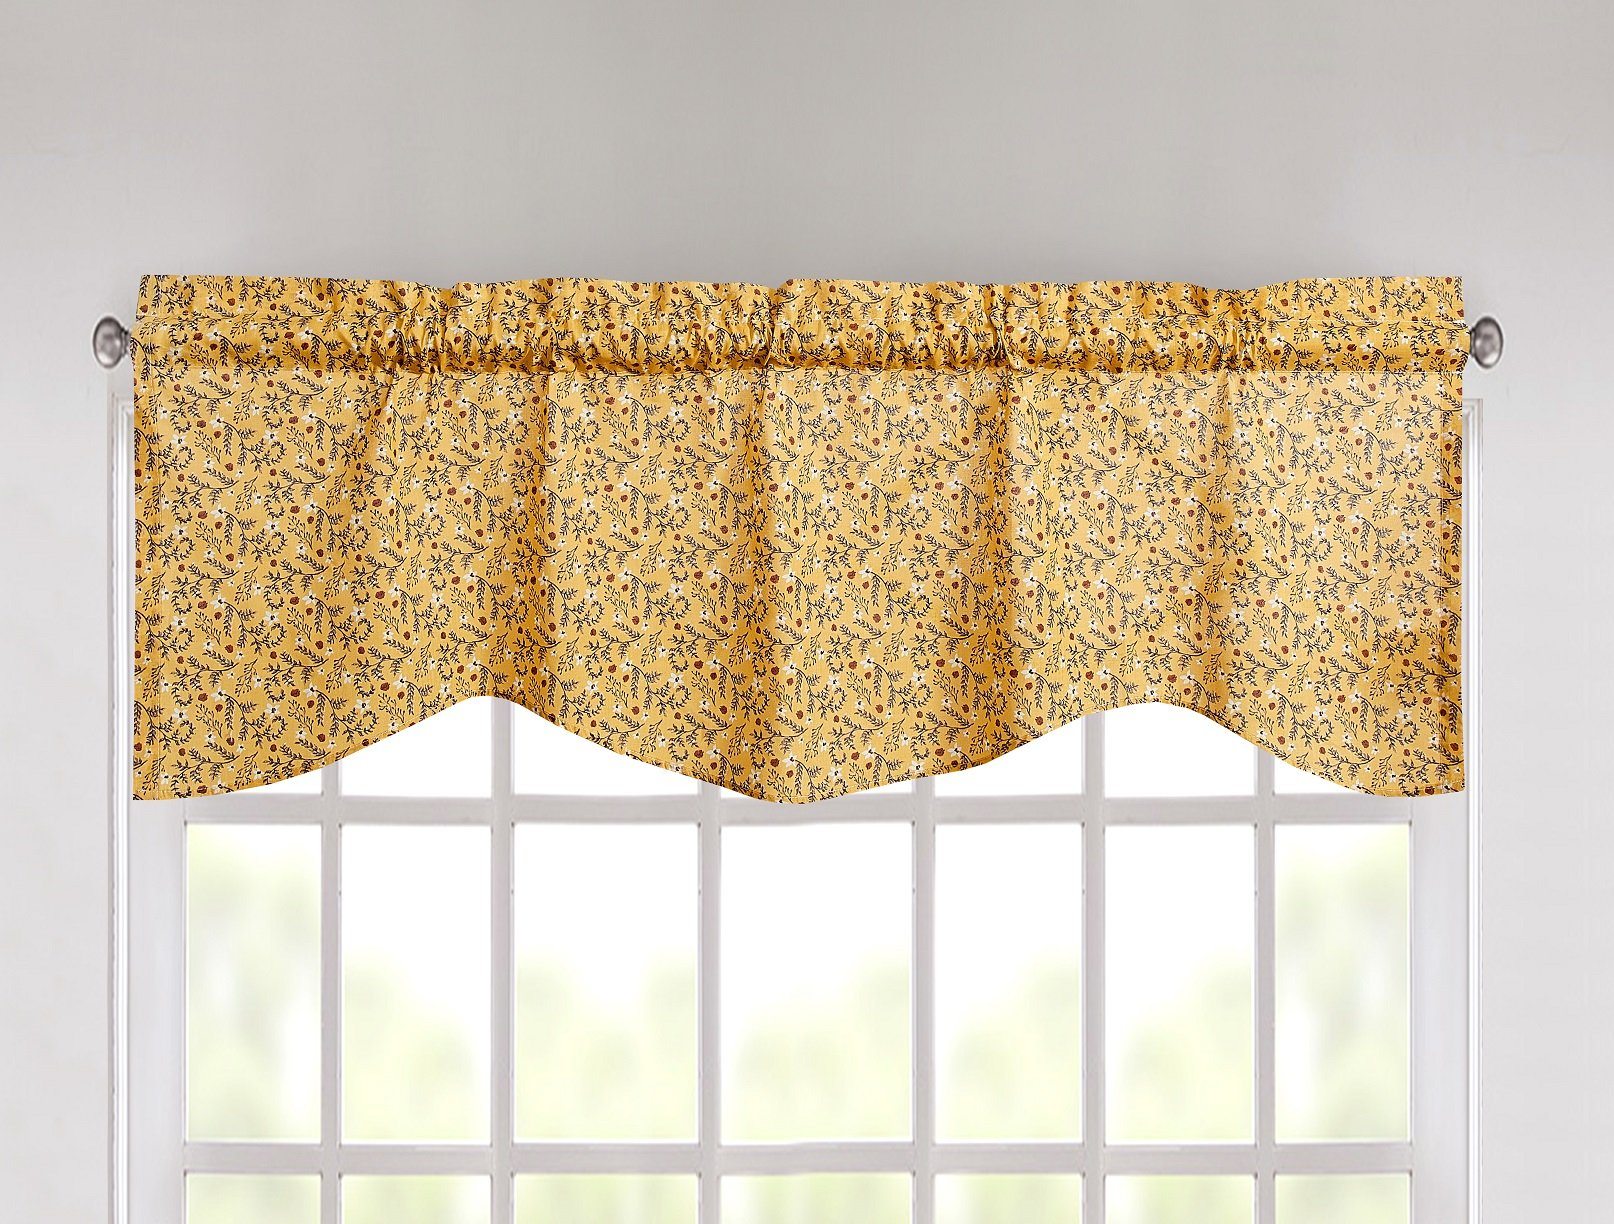 Tache Cotton Mustard Yellow Ditsy Floral Sunset Sheer Window Treatment Valance (JHW-887) - Tache Home Fashion